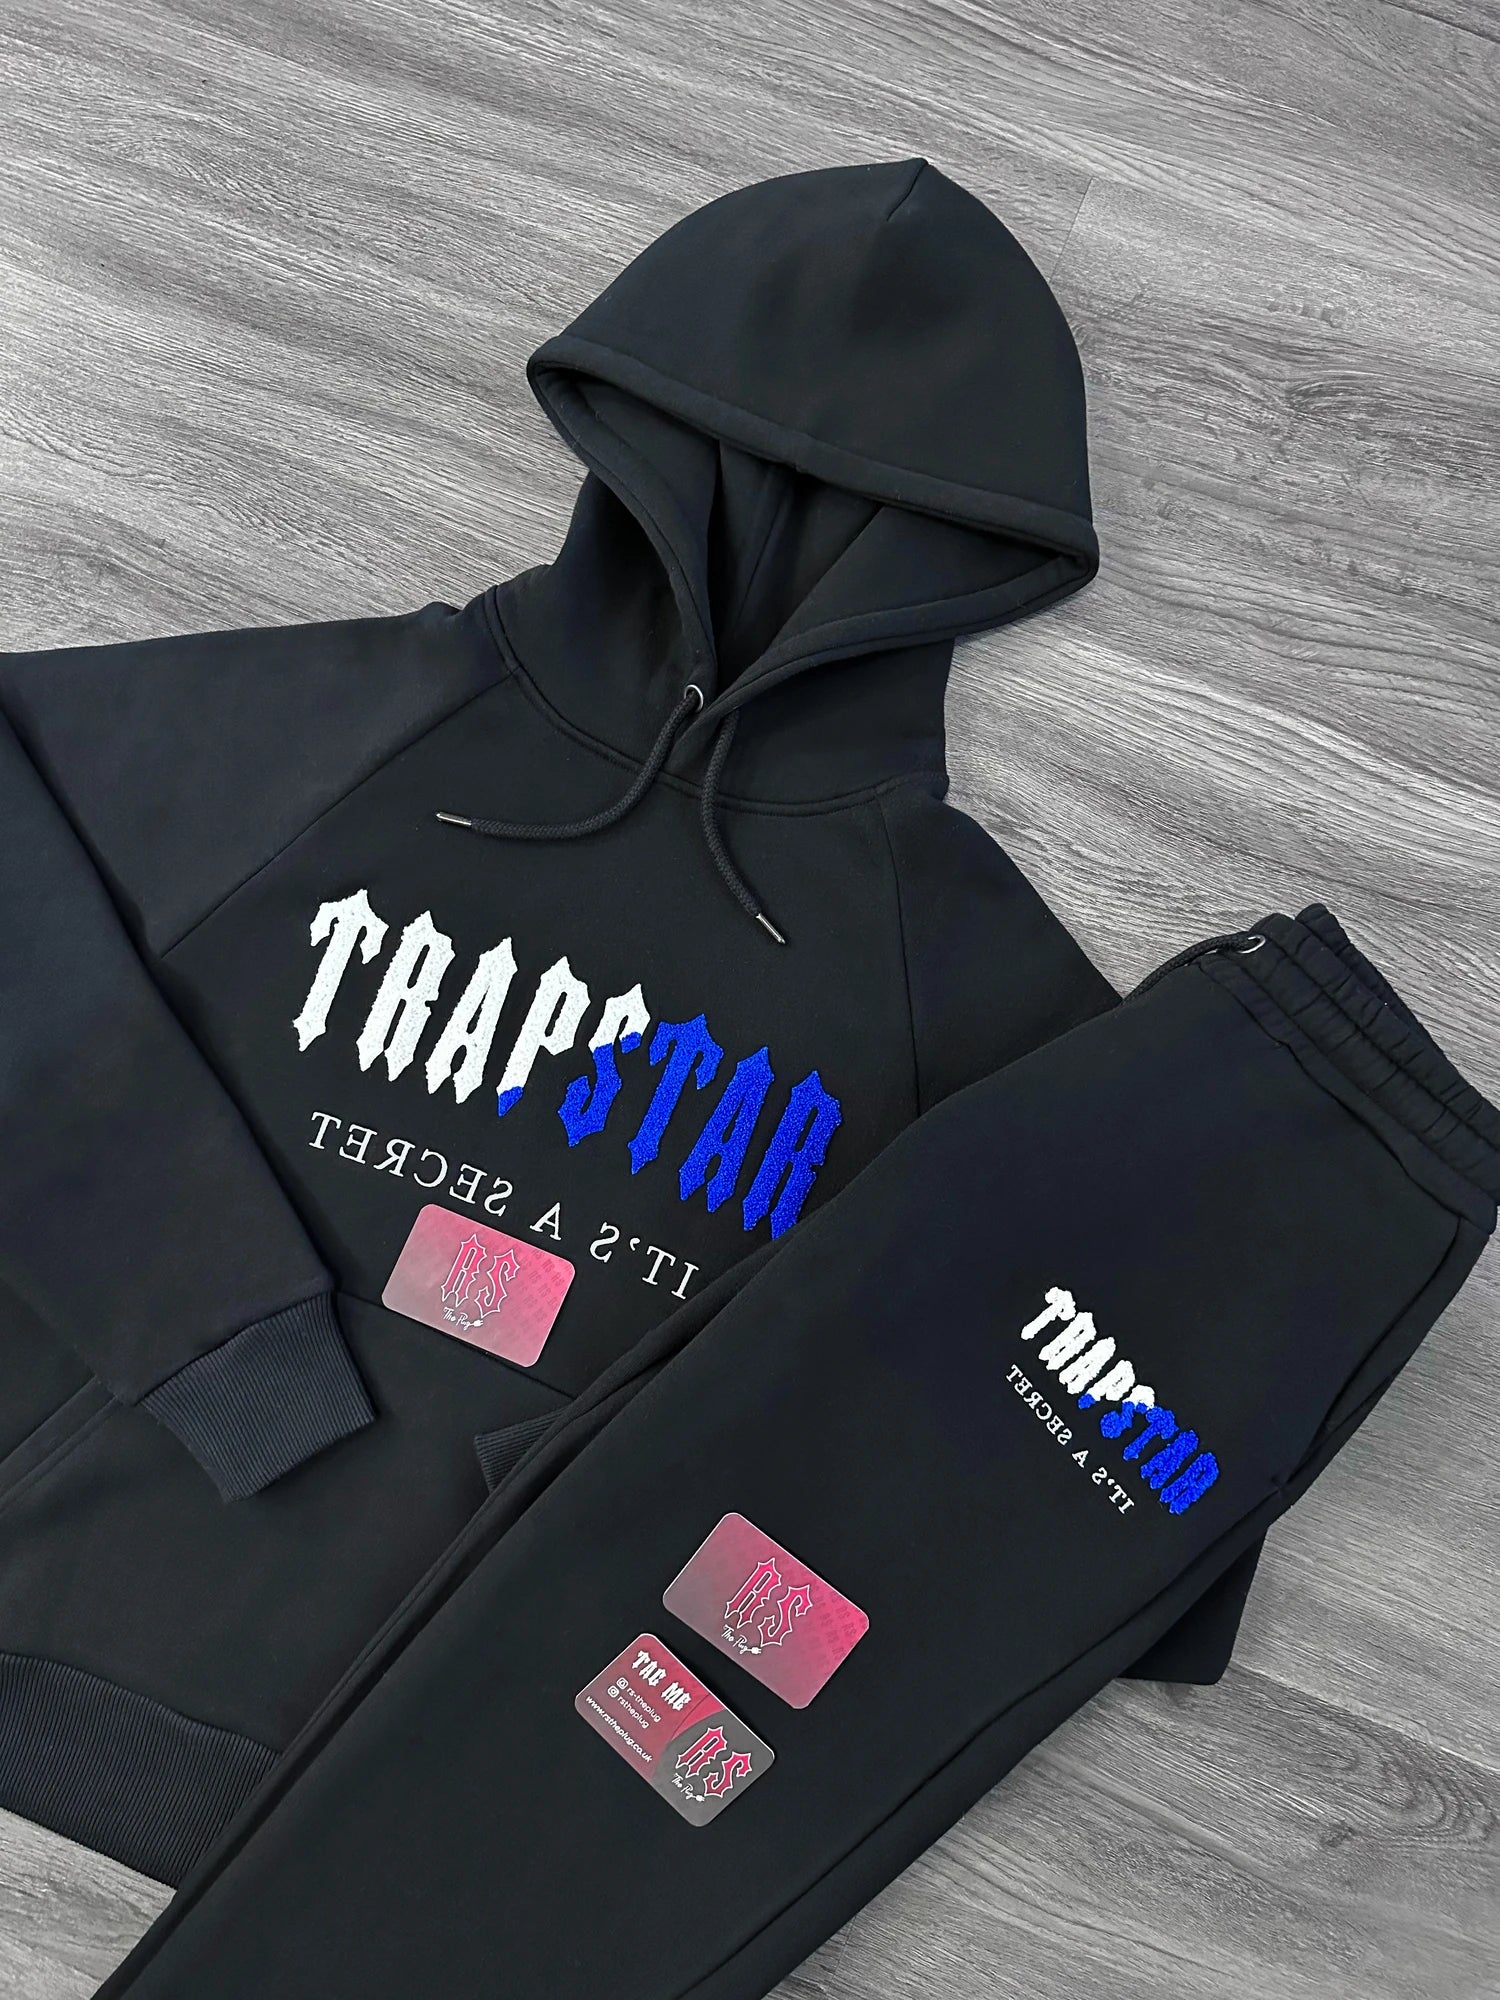 Trapstar Chenille Tracksuit Black Ice